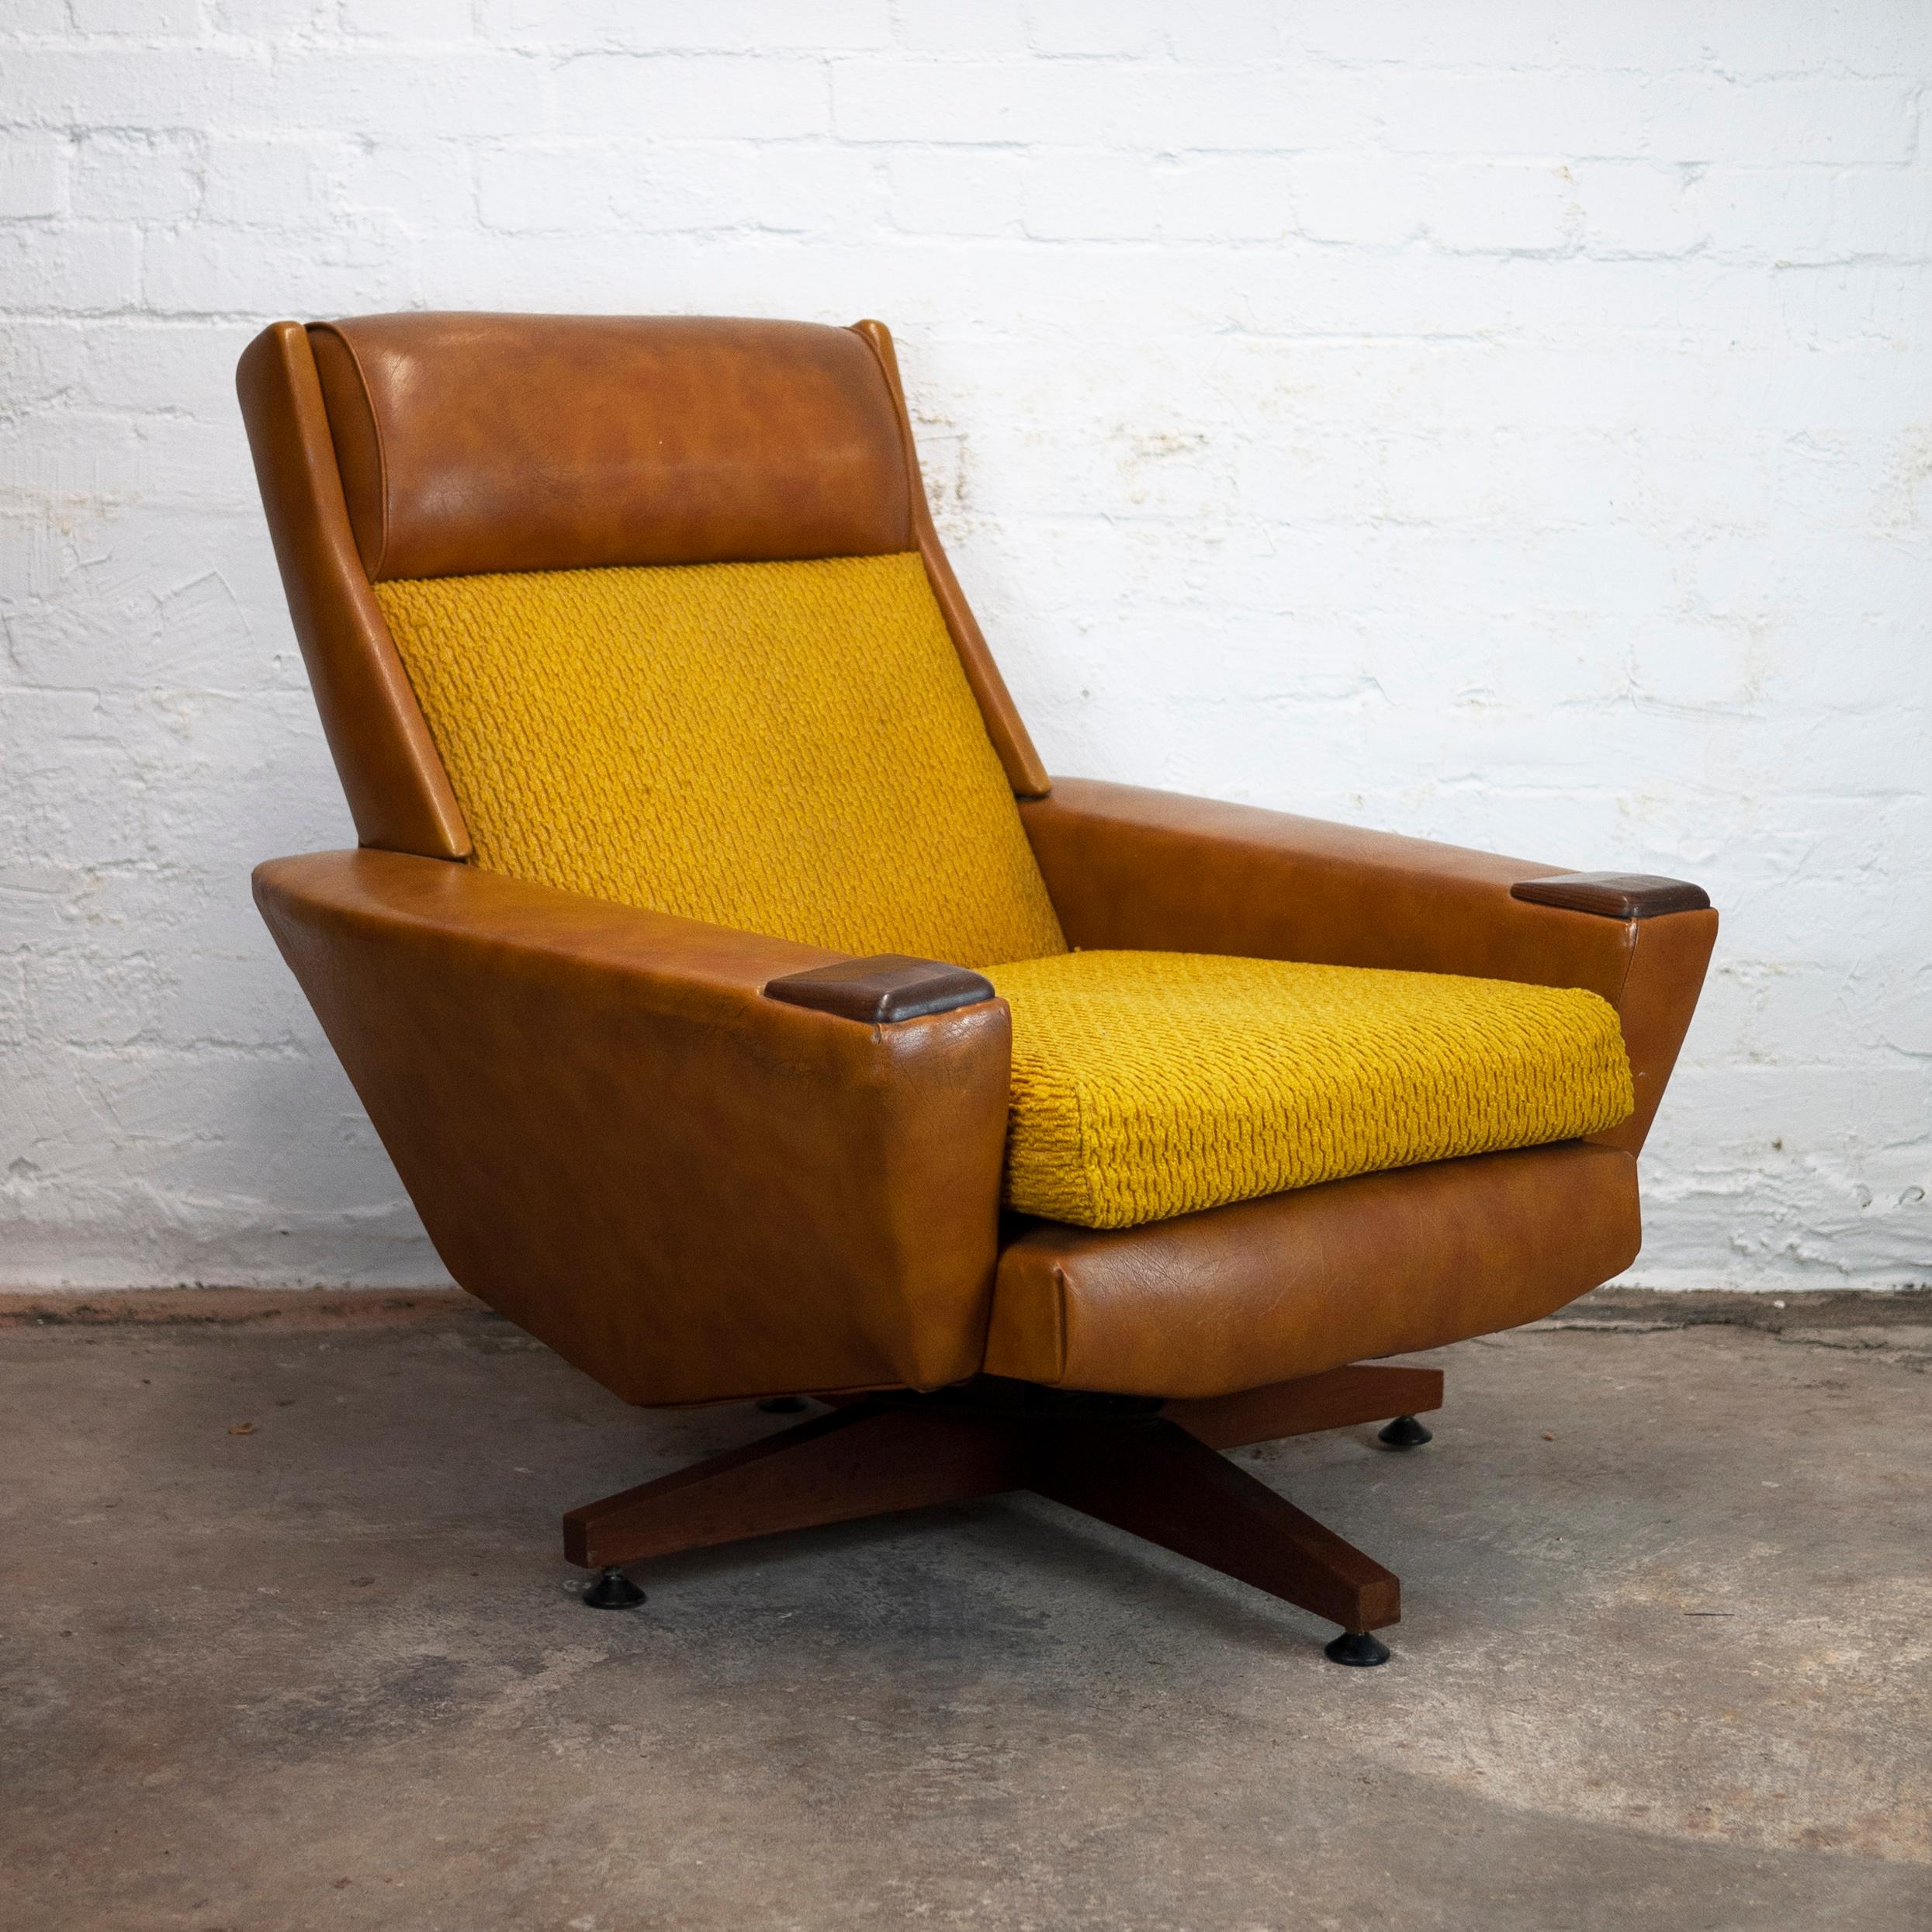 Late 20th Century Mid-Century Brown Leather and Mustard Textured Fabric Armchair, 1970s For Sale